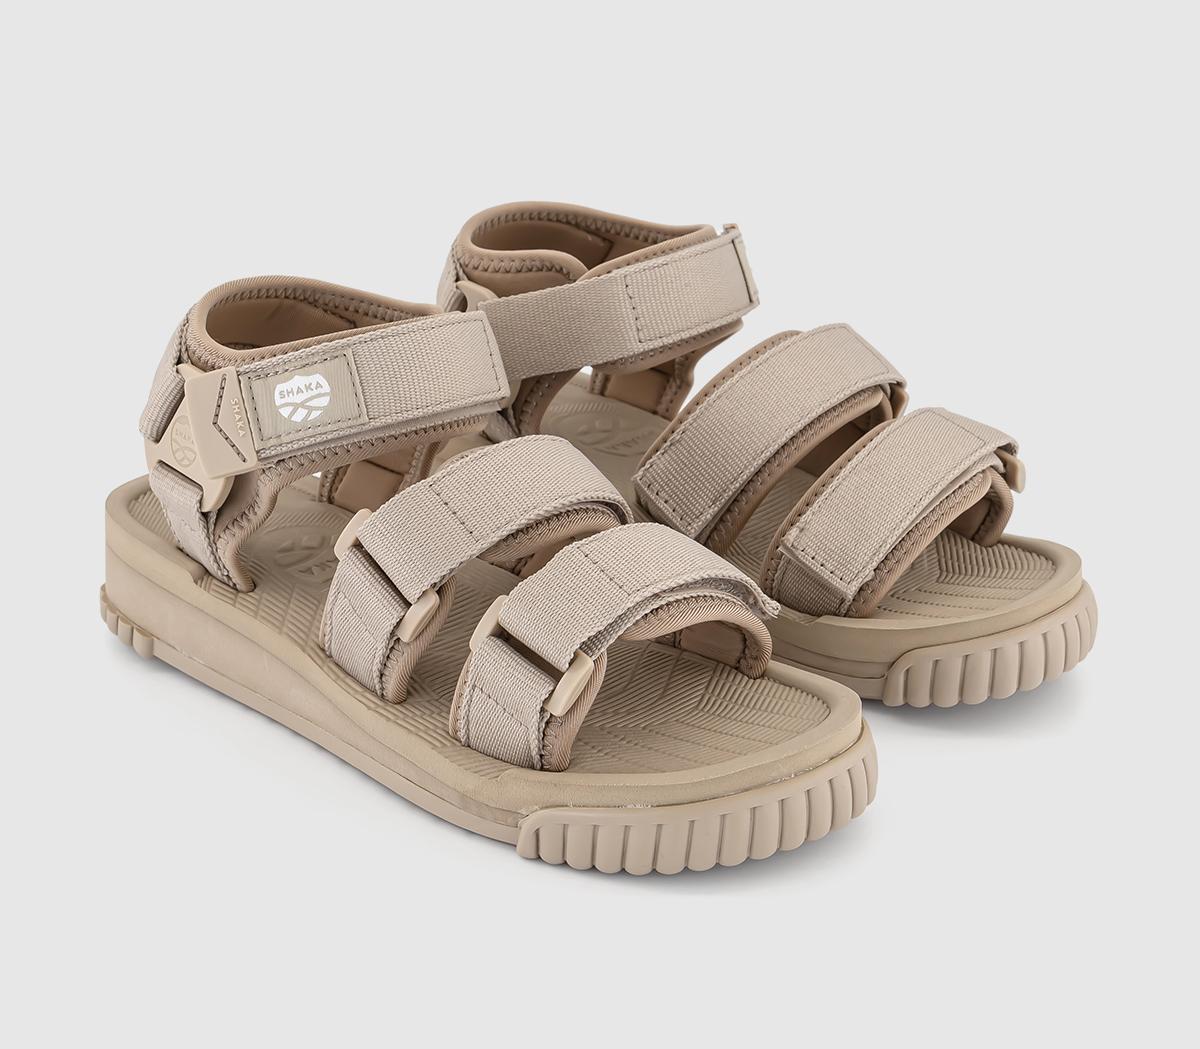 Shaka Neo Bungy Sandals Taupe Natural, 4